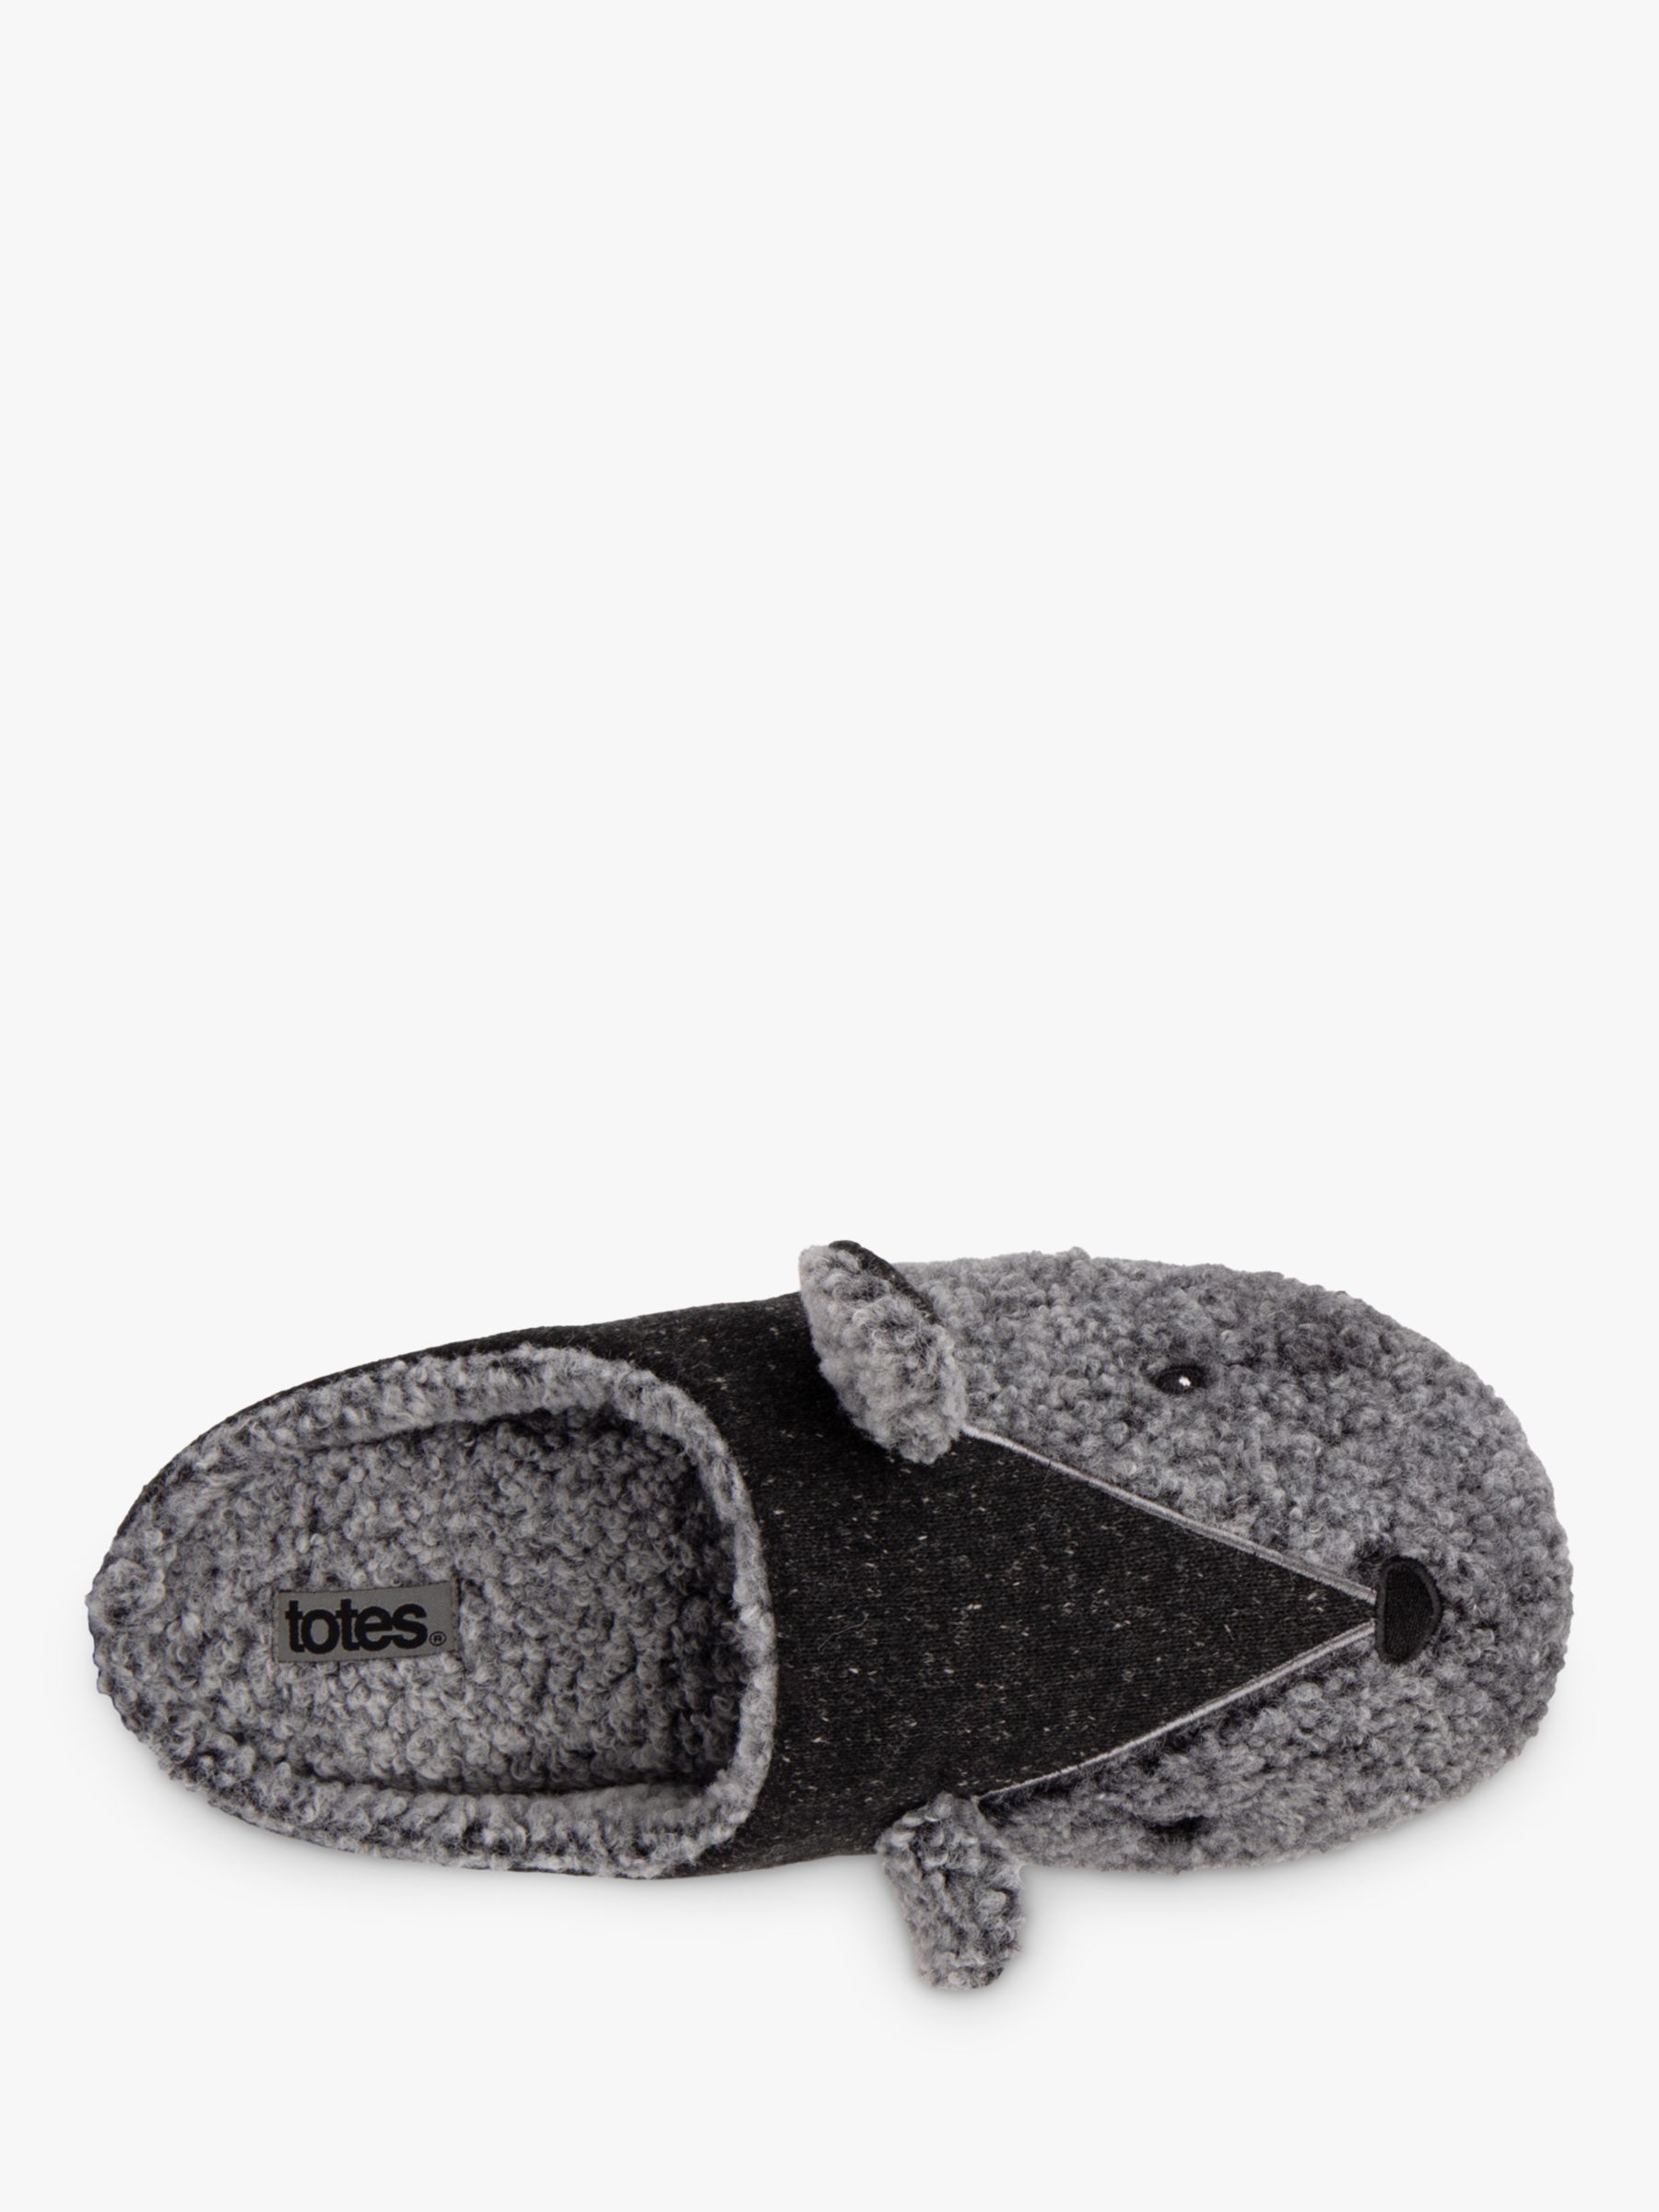 totes Mouse Mule Slippers, Black/Grey at John Lewis & Partners